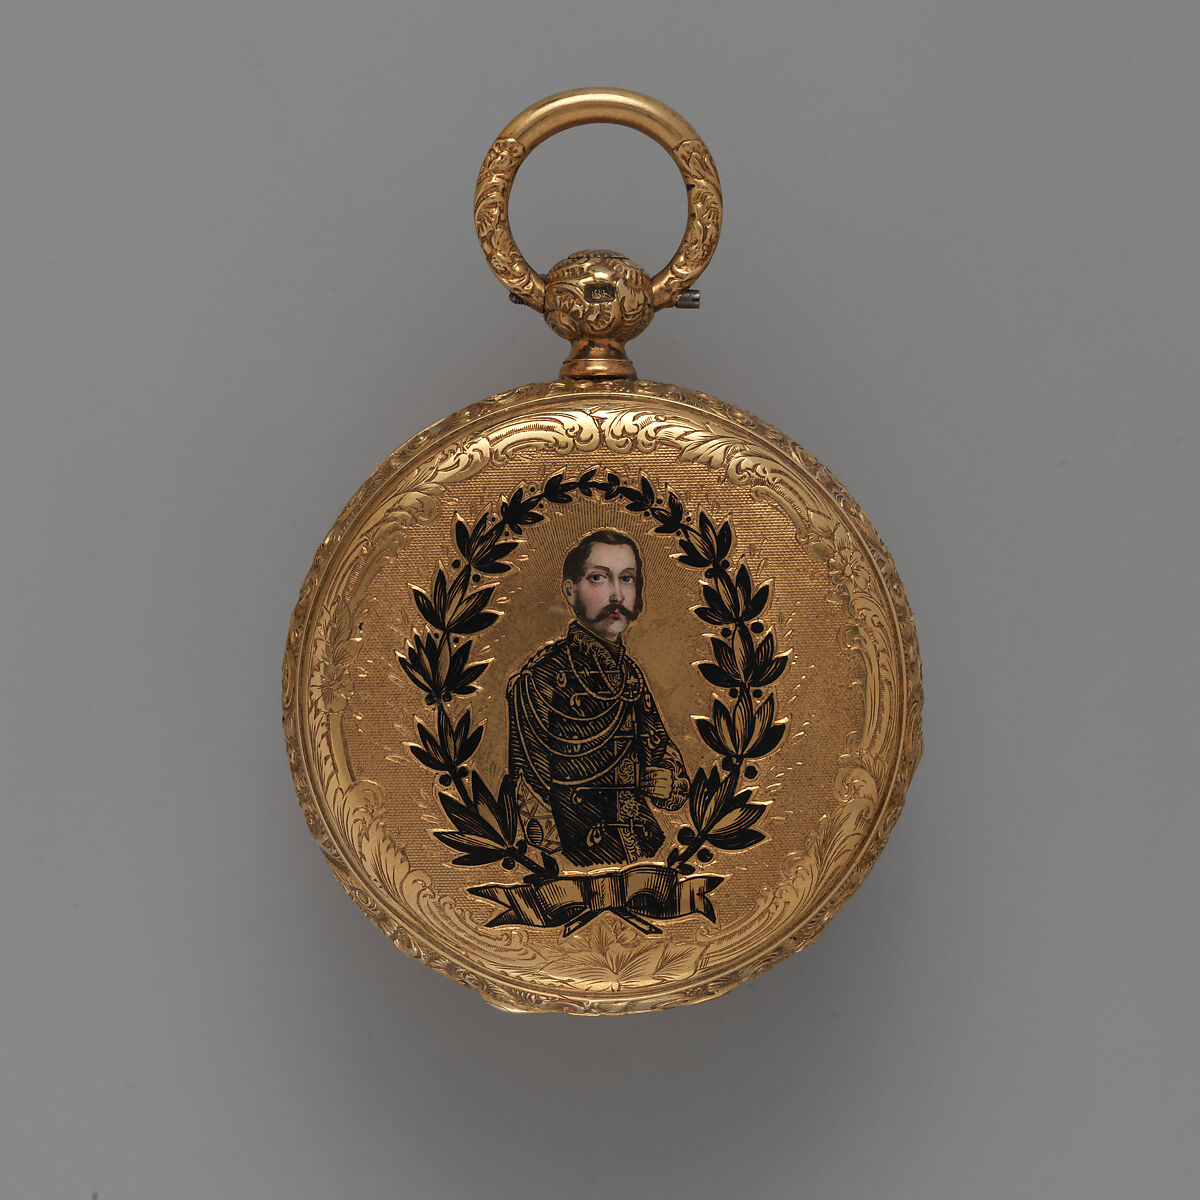 Watch, with a portrait of Alexander II, czar of Russia (r. 1855–81), Case of gold and enamel; jeweled movement, with Chinese duplex escapement, Swiss, probably Fleurier 